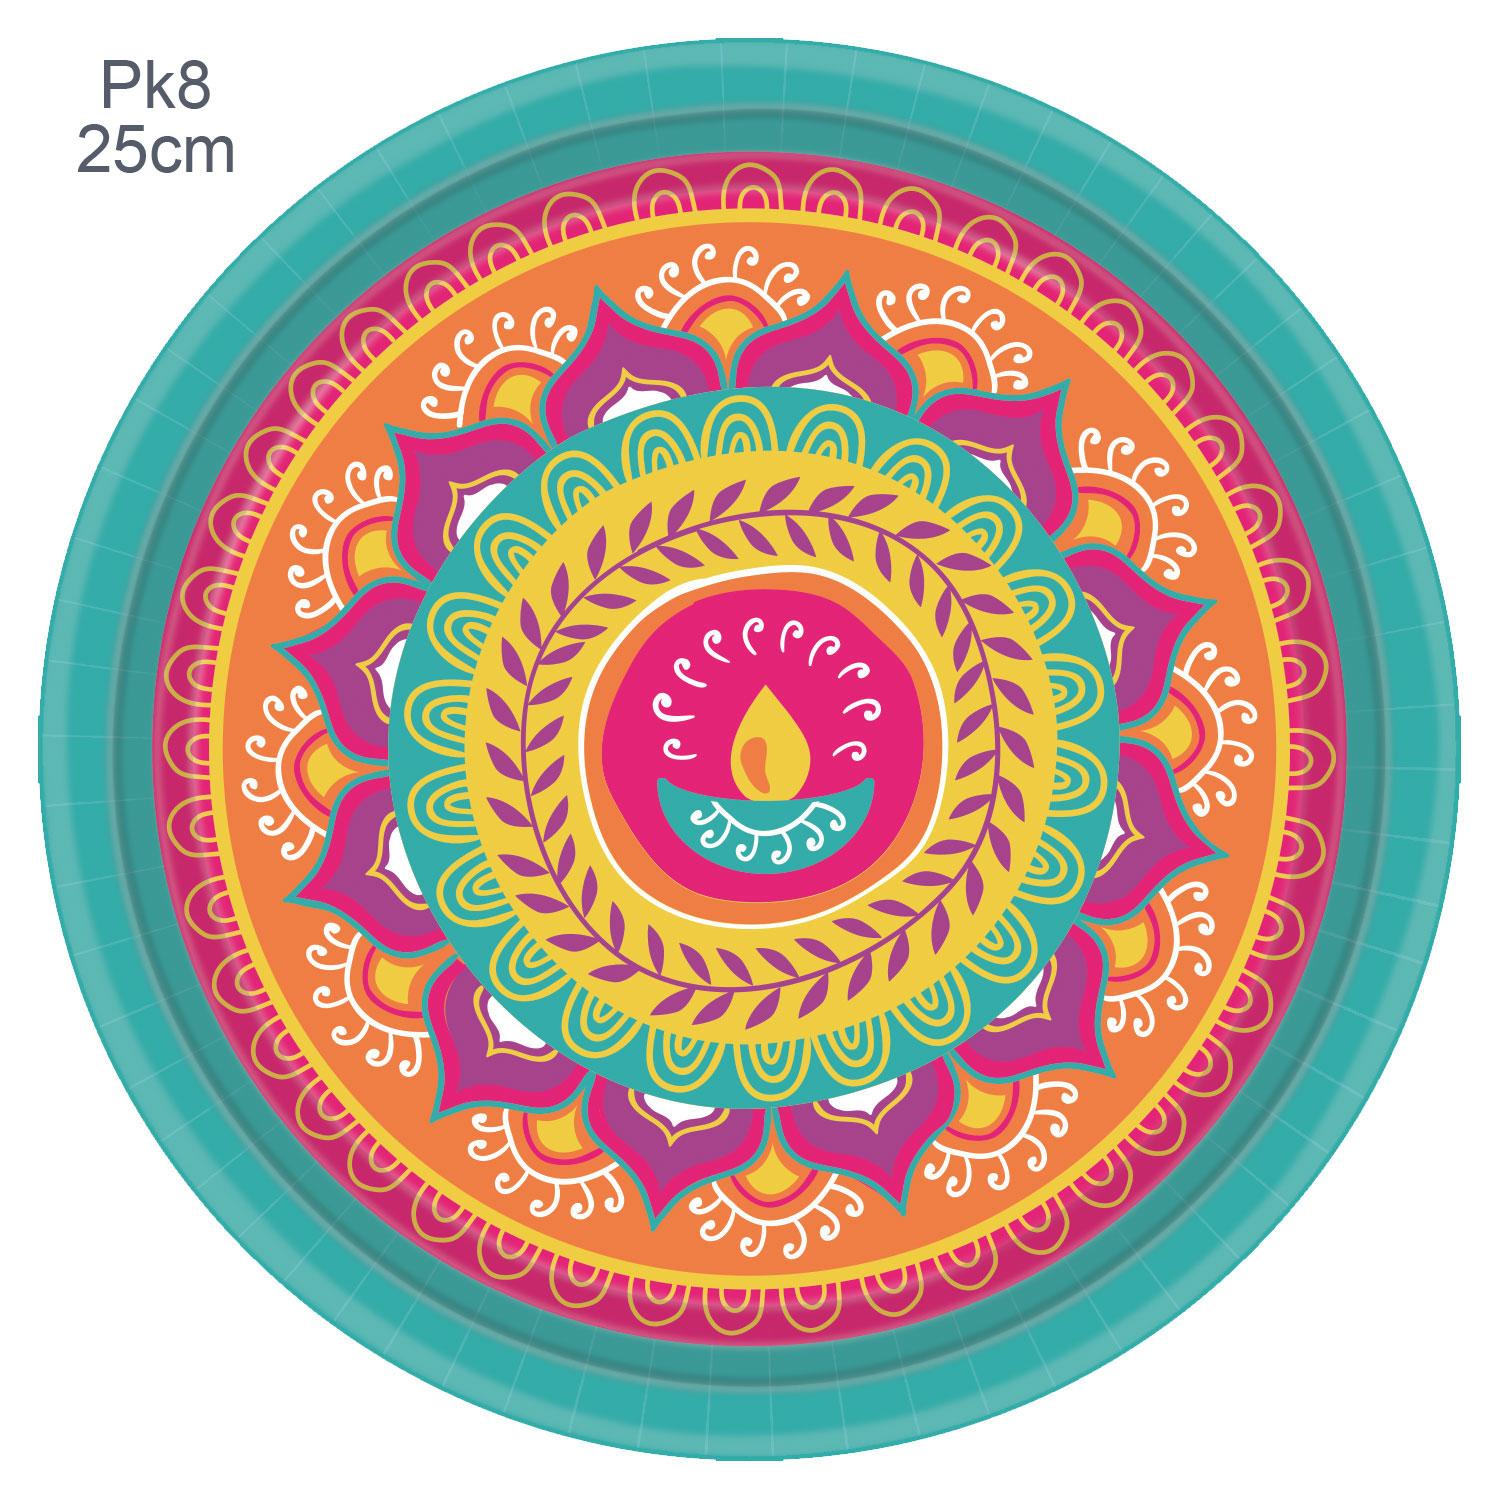 Diwali Celebrations Round Paper Plates 25cm pk8 by Amscan 592413 available here at Karnival Costumes online party shop